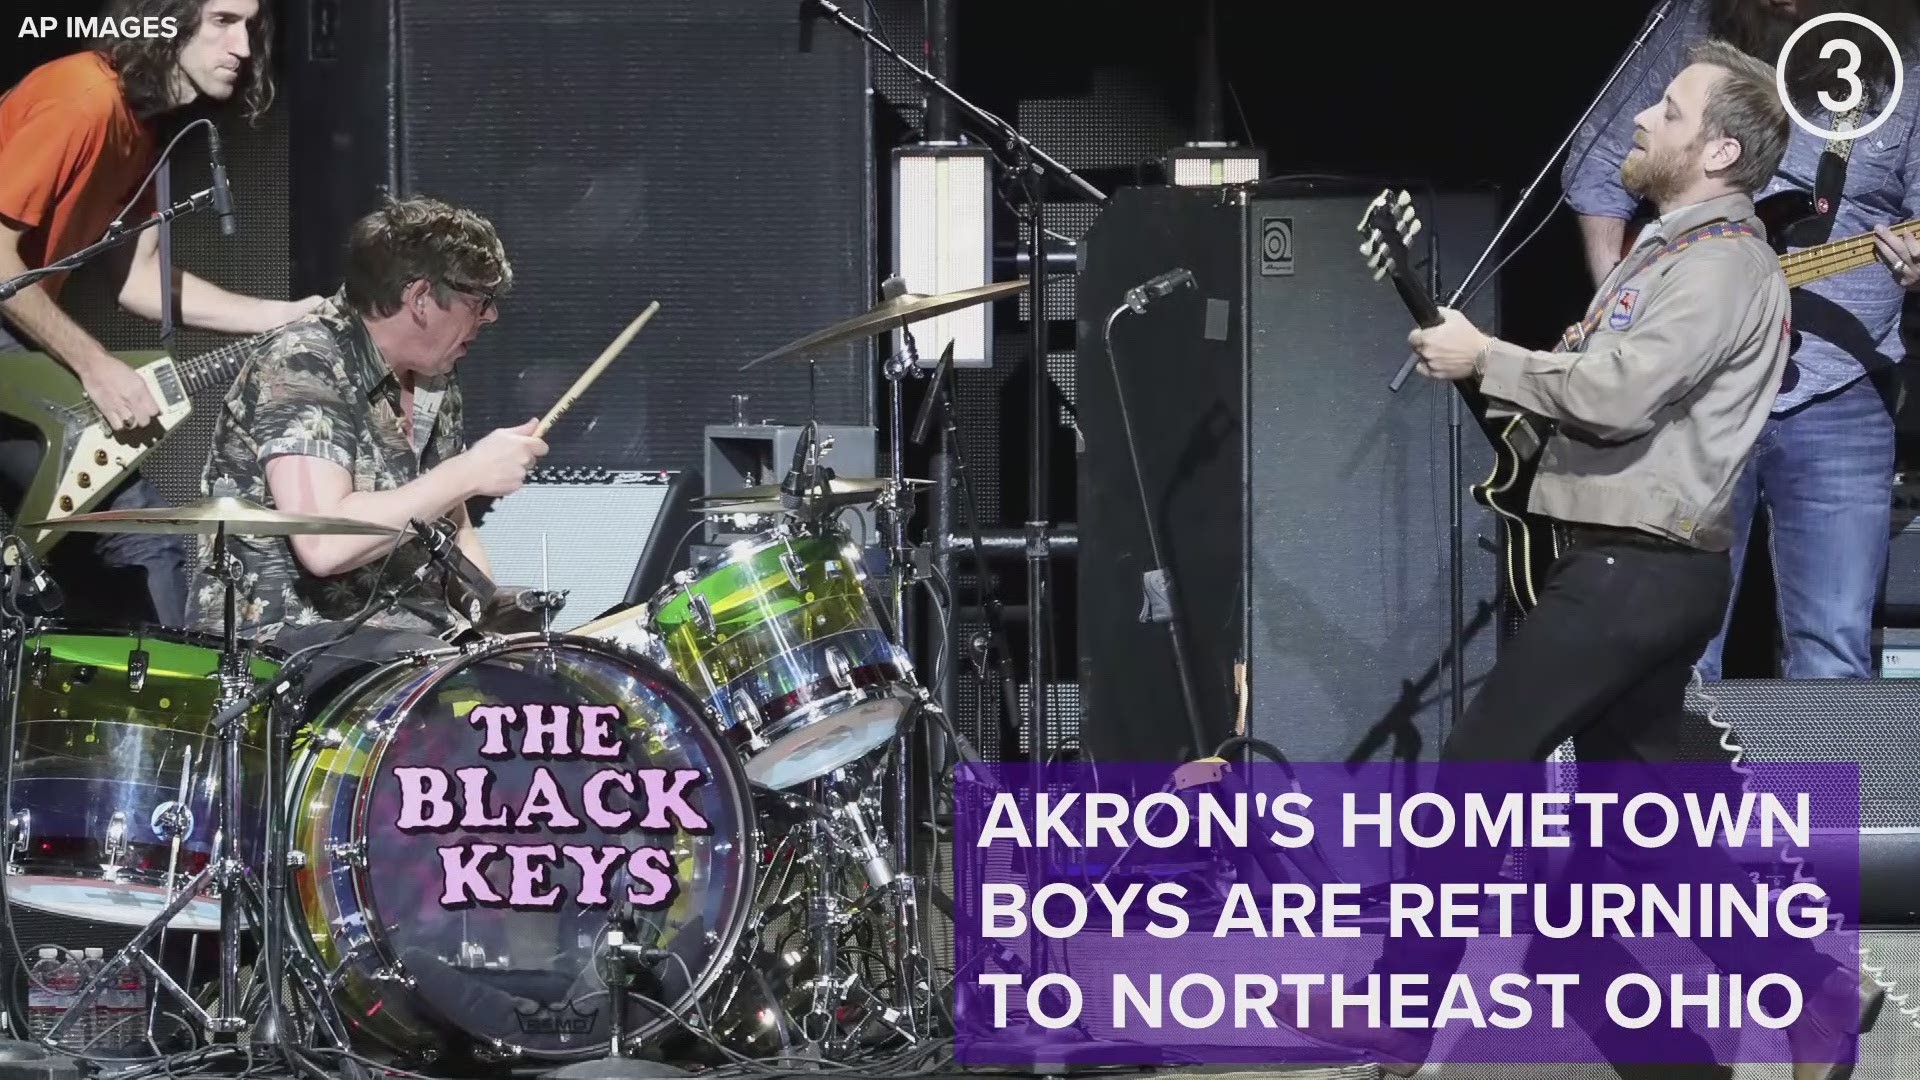 Making Akron proud! The Black Keys are coming to town!